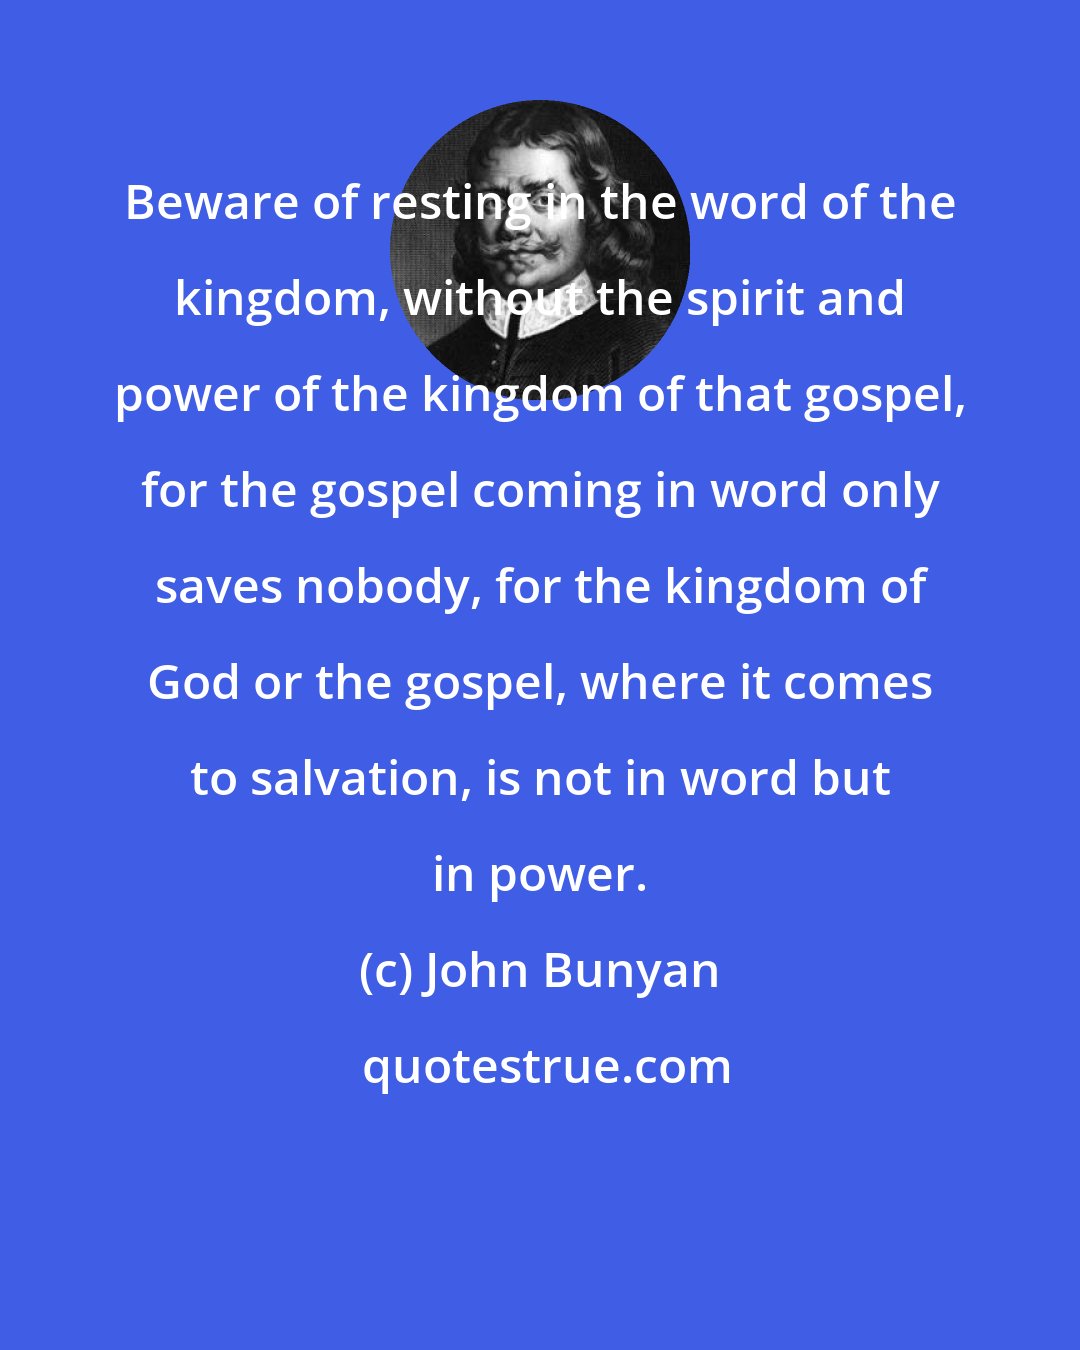 John Bunyan: Beware of resting in the word of the kingdom, without the spirit and power of the kingdom of that gospel, for the gospel coming in word only saves nobody, for the kingdom of God or the gospel, where it comes to salvation, is not in word but in power.